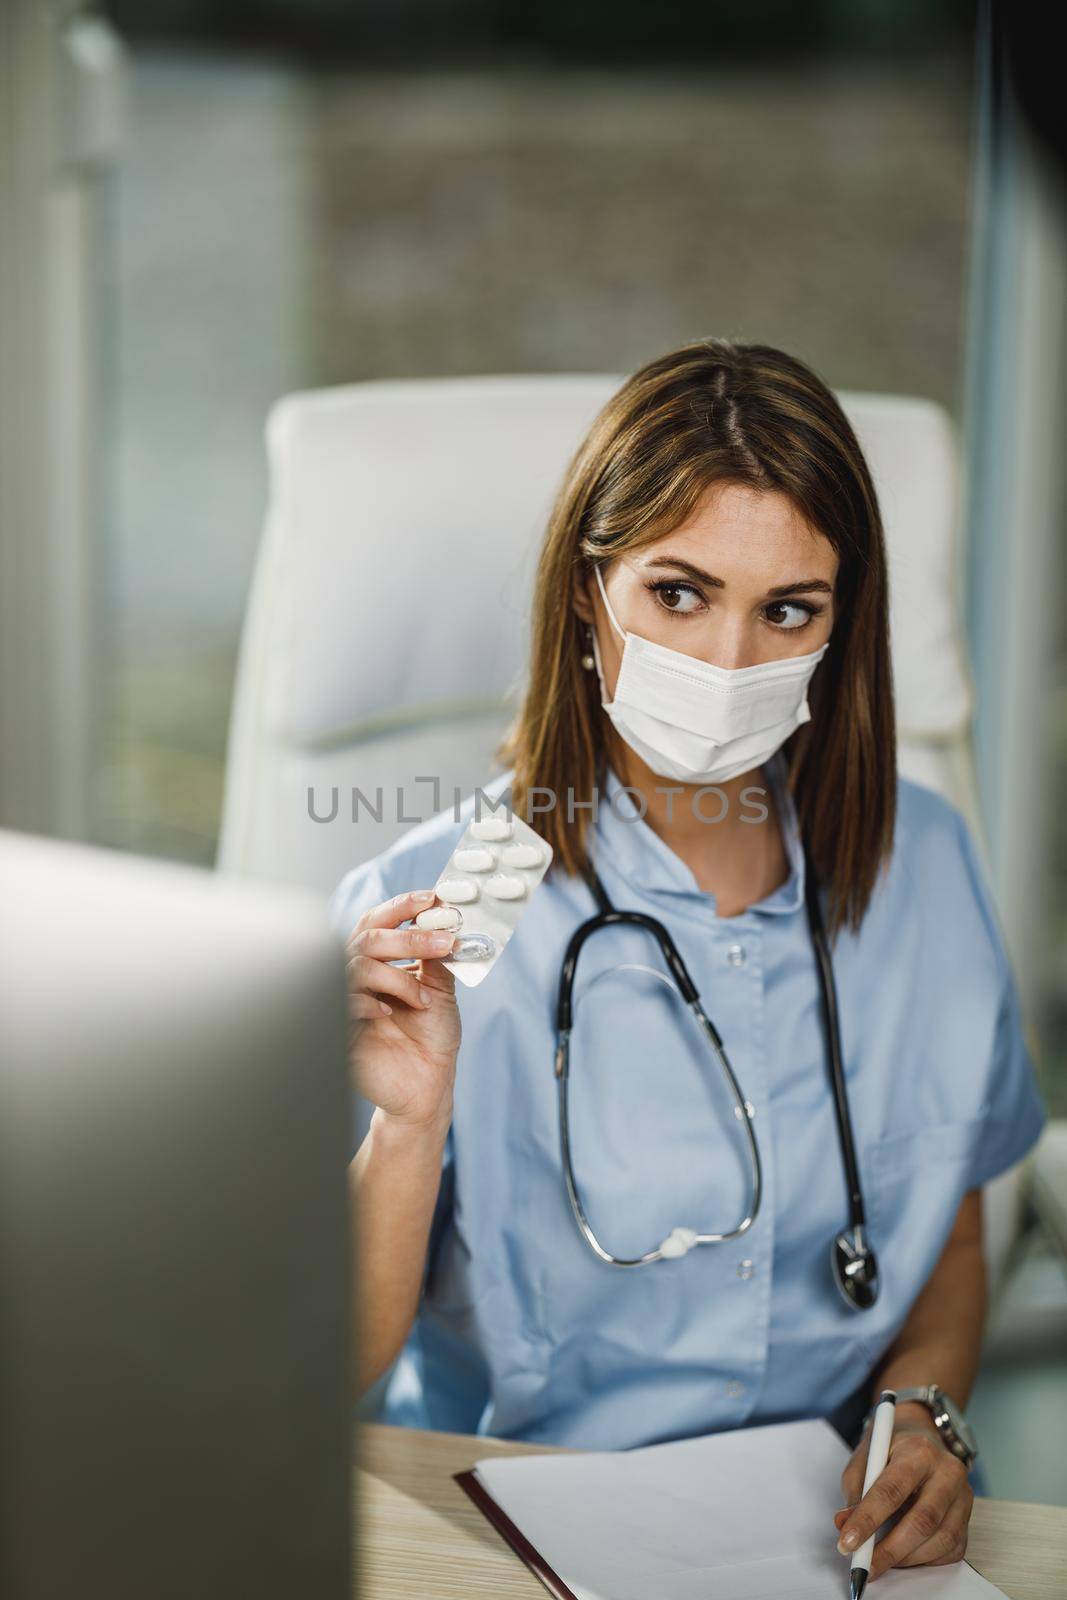 A female nurse with protective face mask having video call with patient on computer during COVID-19 pandemic.